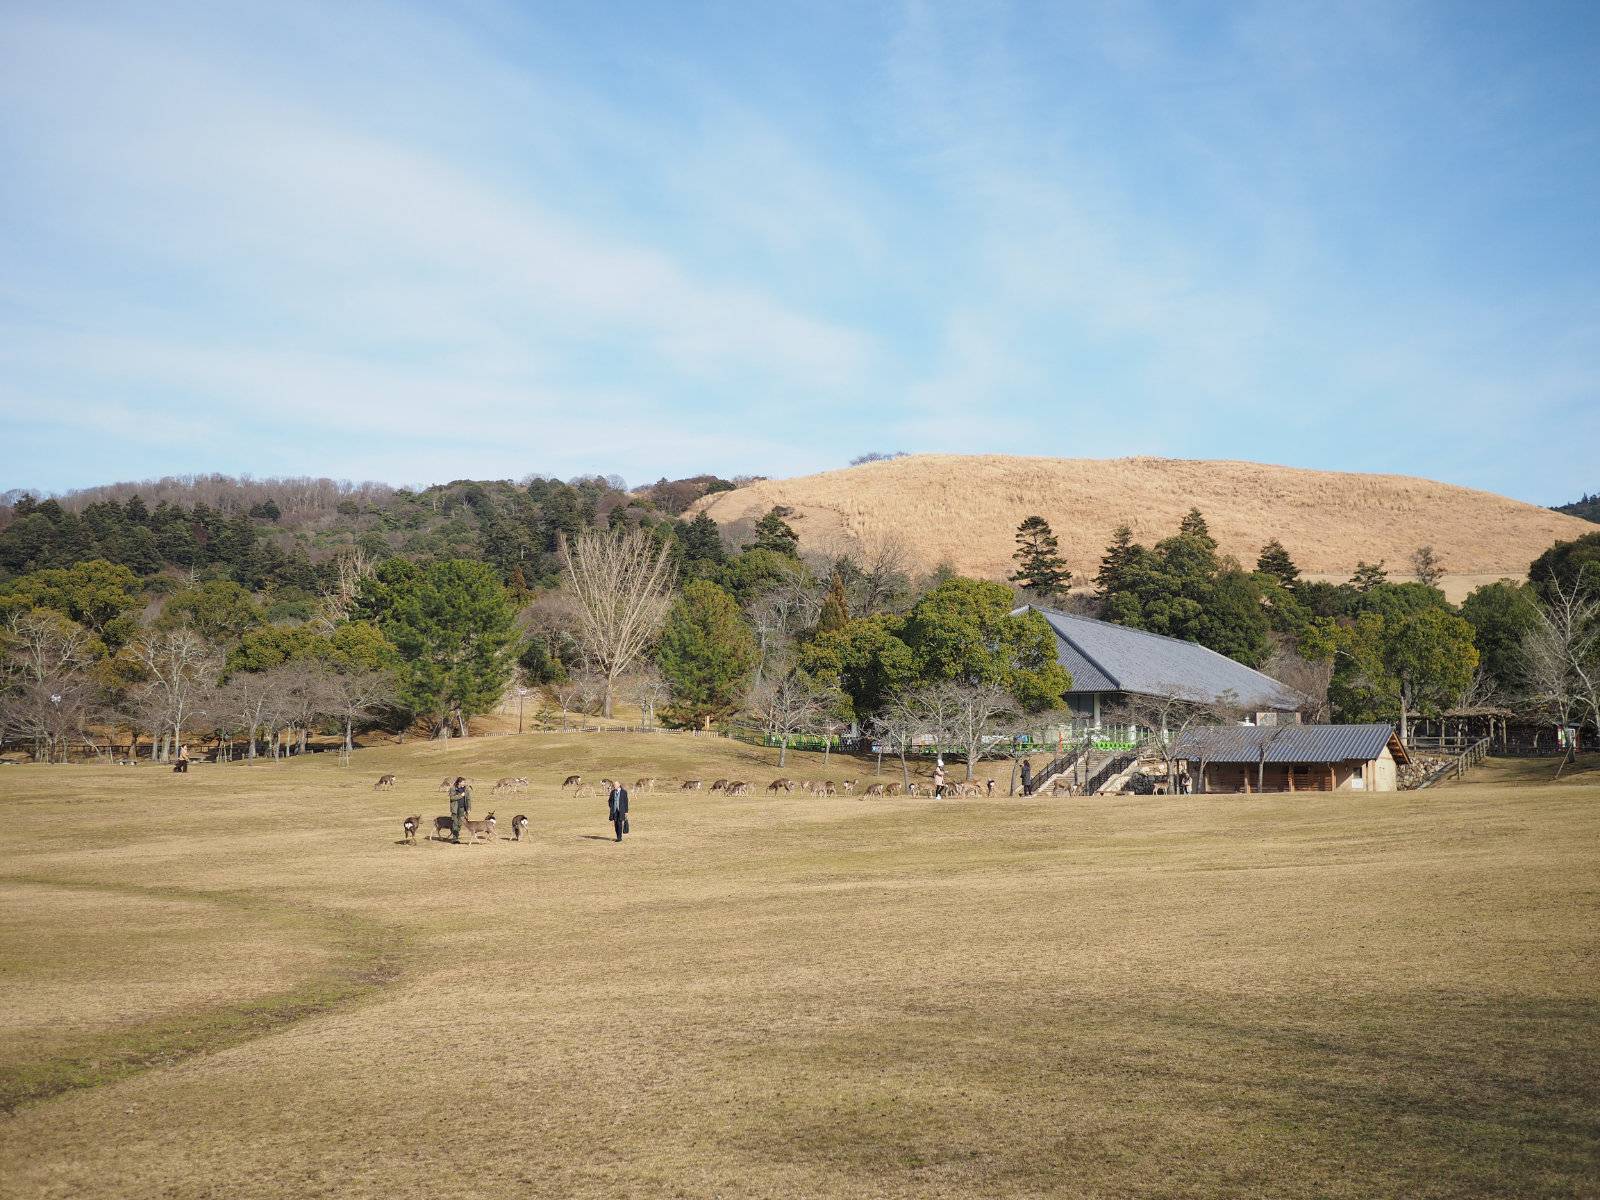 Nara fields of grass and trees